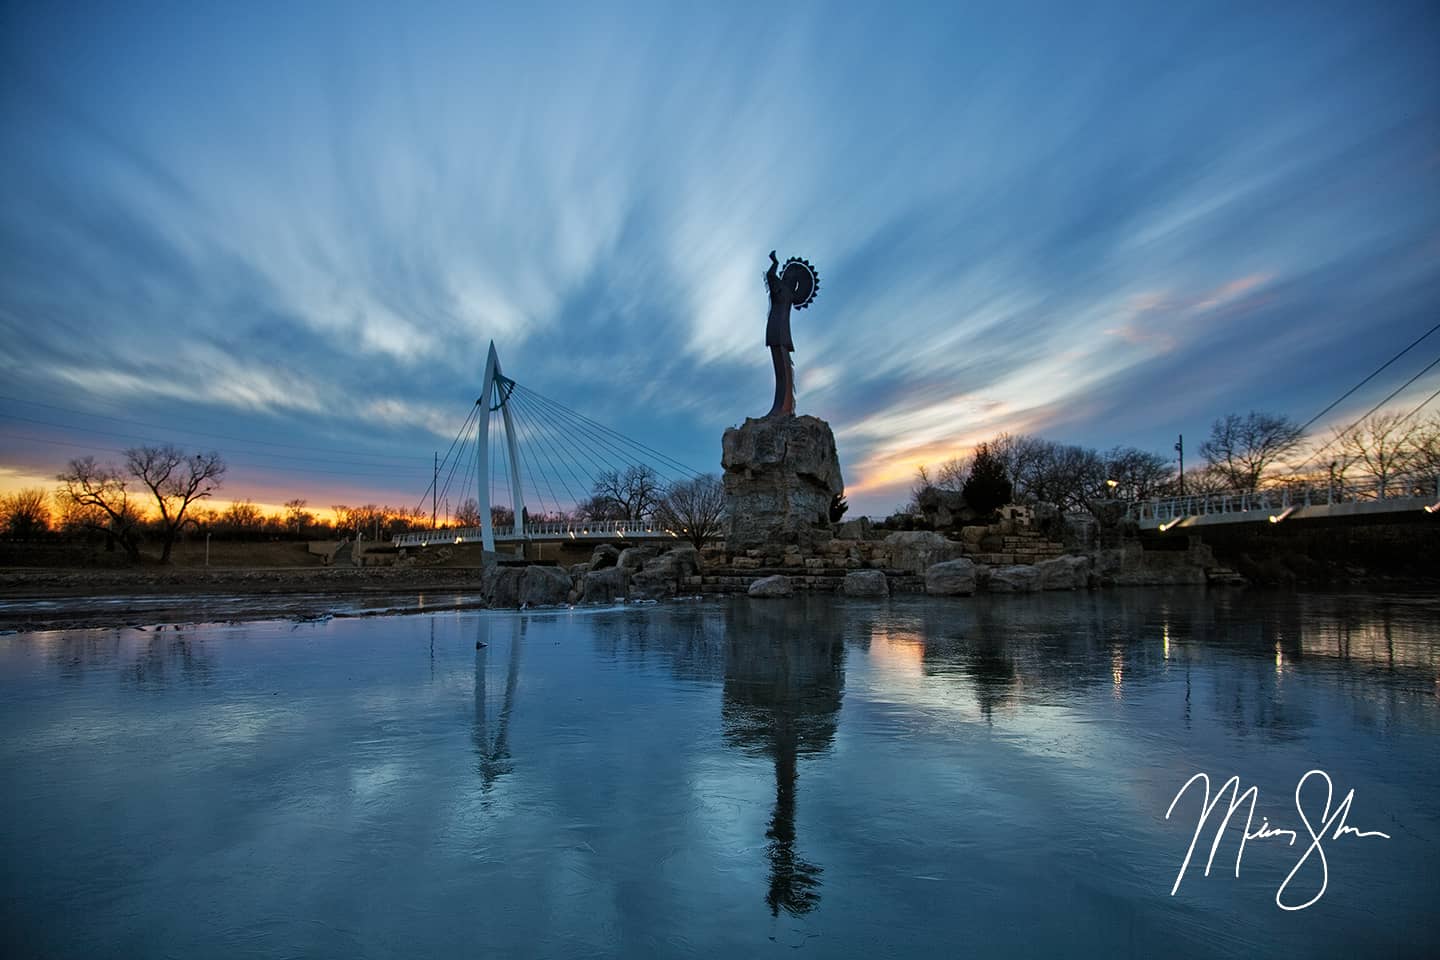 Keeper of the Clouds - Keeper of the Plains, Wichita, Kansas